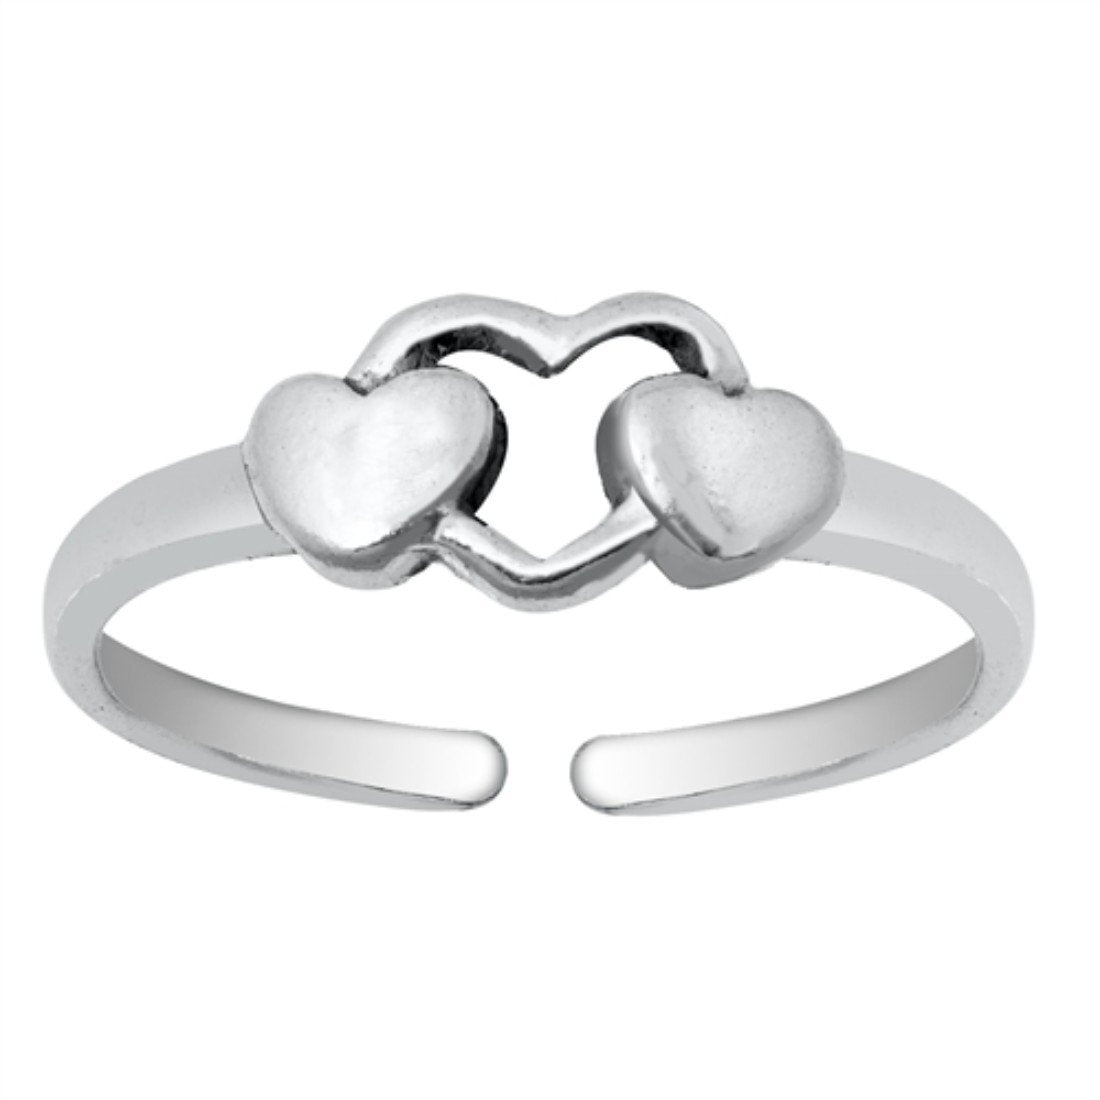 Adjustable Hearts Silver Toe Ring Band 925 Sterling Silver (5mm)